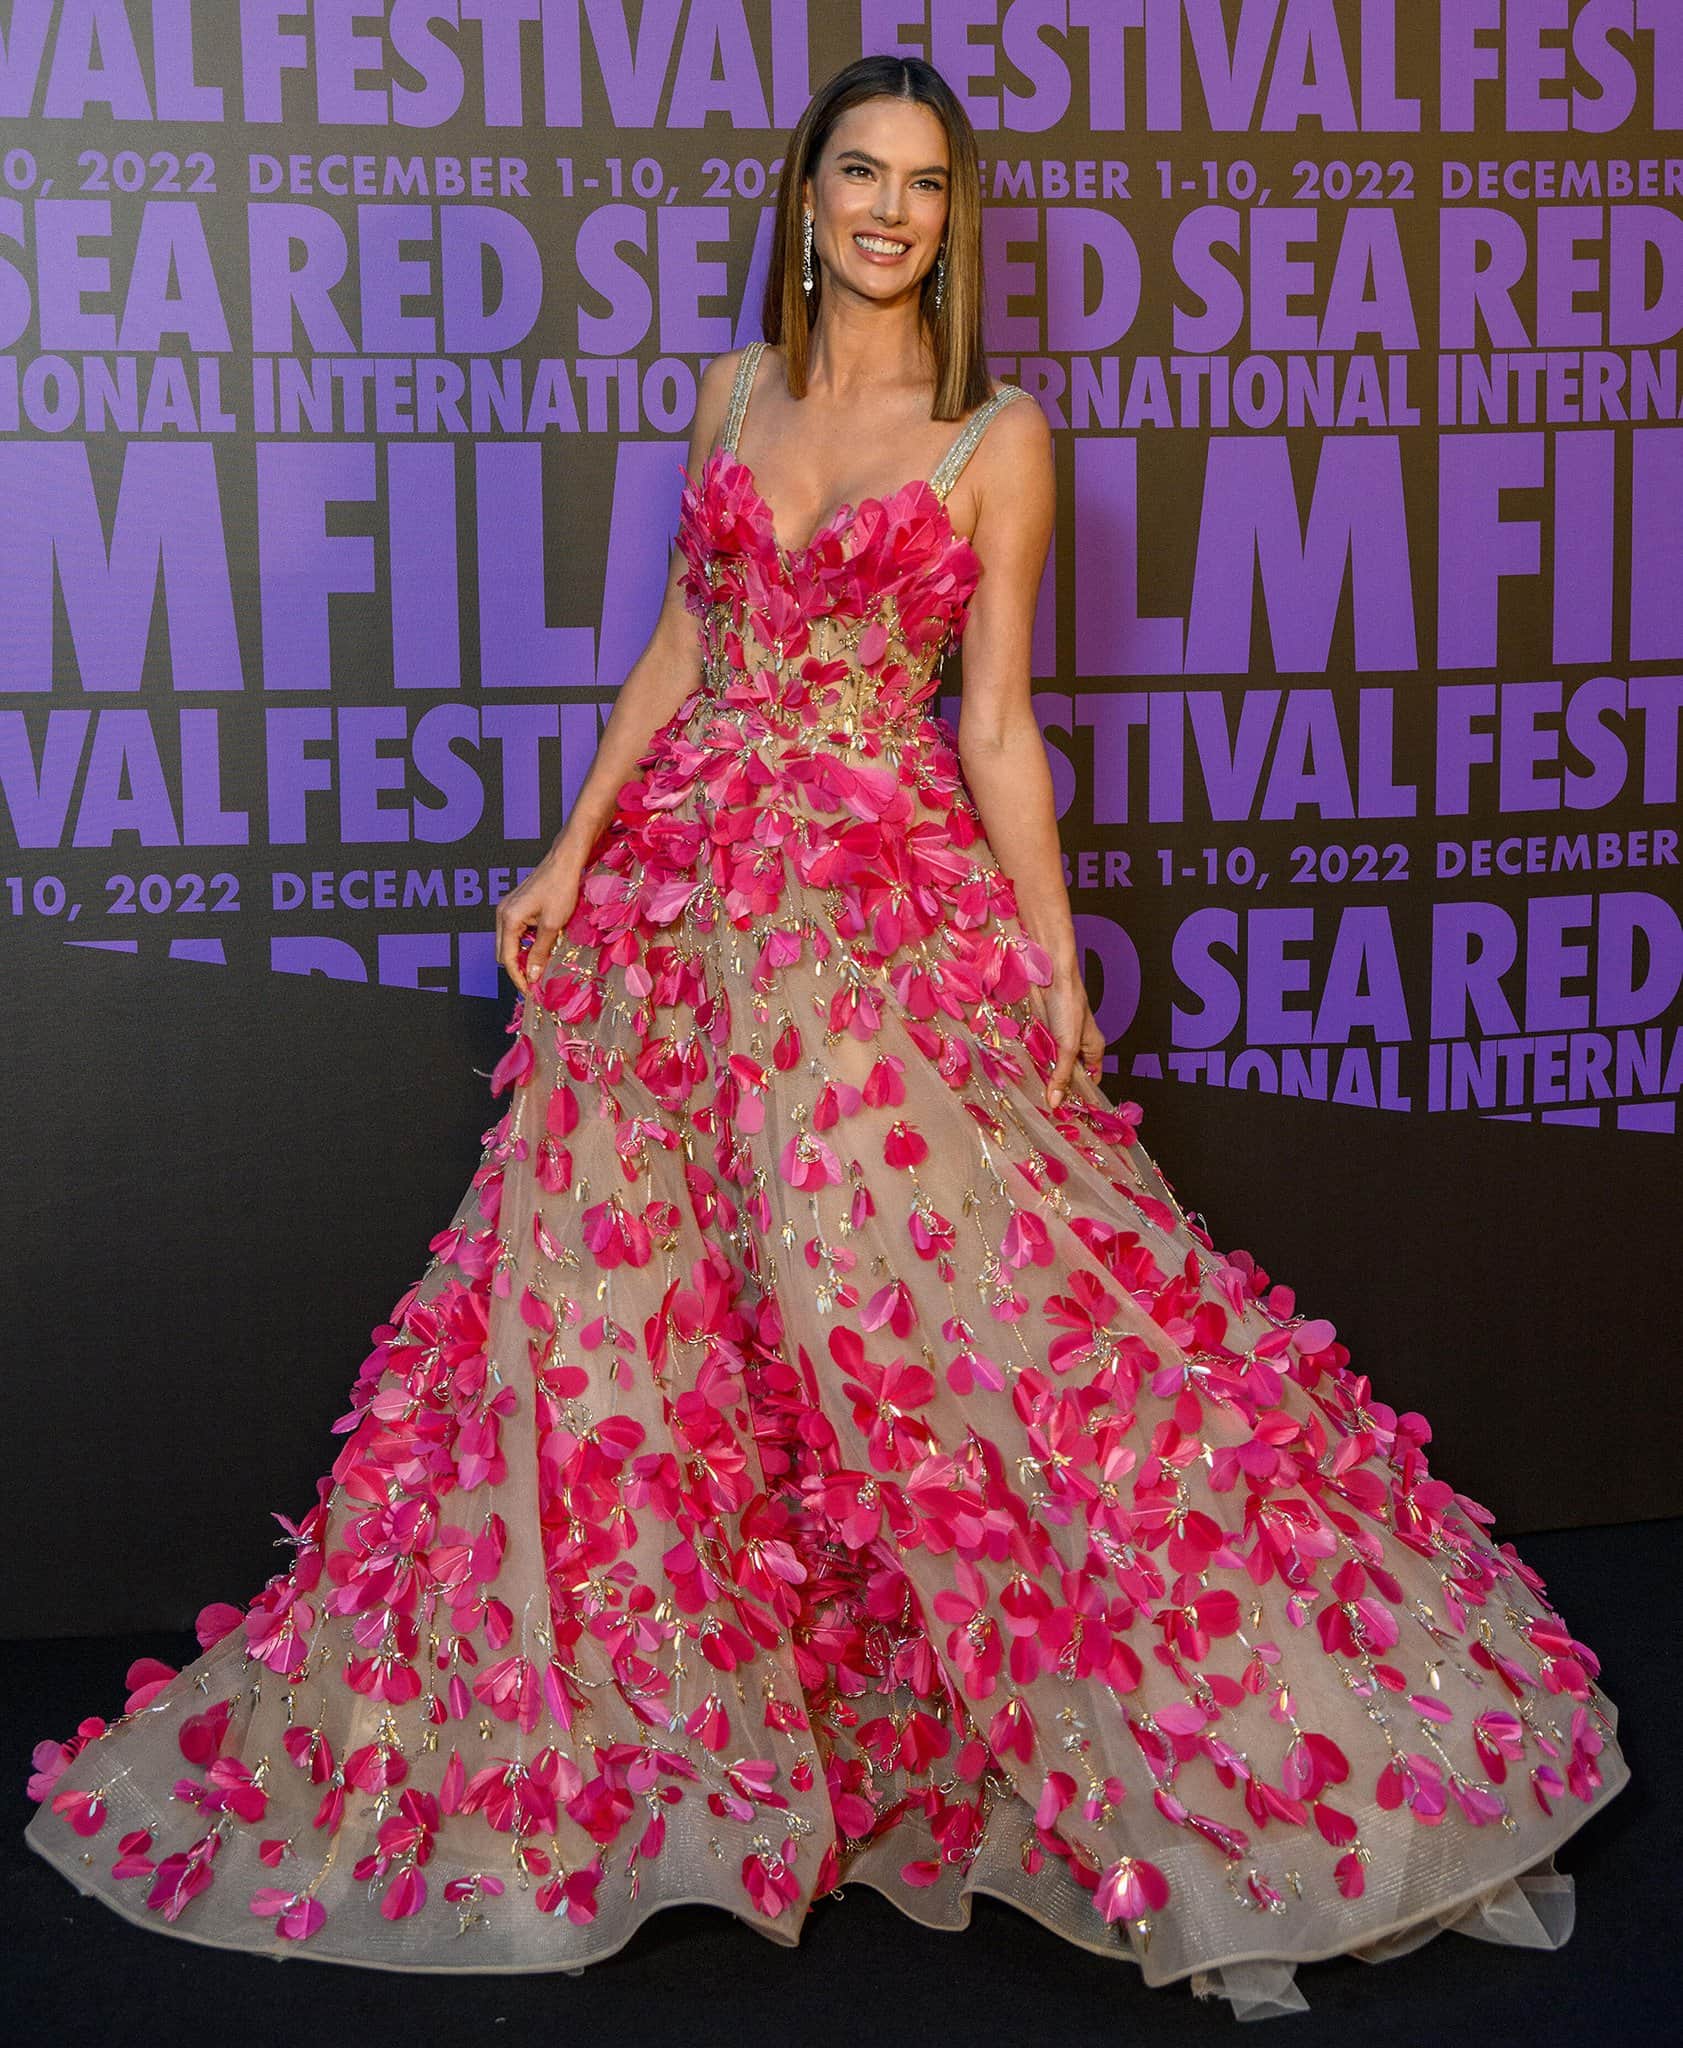 Alessandra Ambrosio at the Celebration of Women in Cinema Gala during the 75th Cannes Film Festival on May 21, 2022